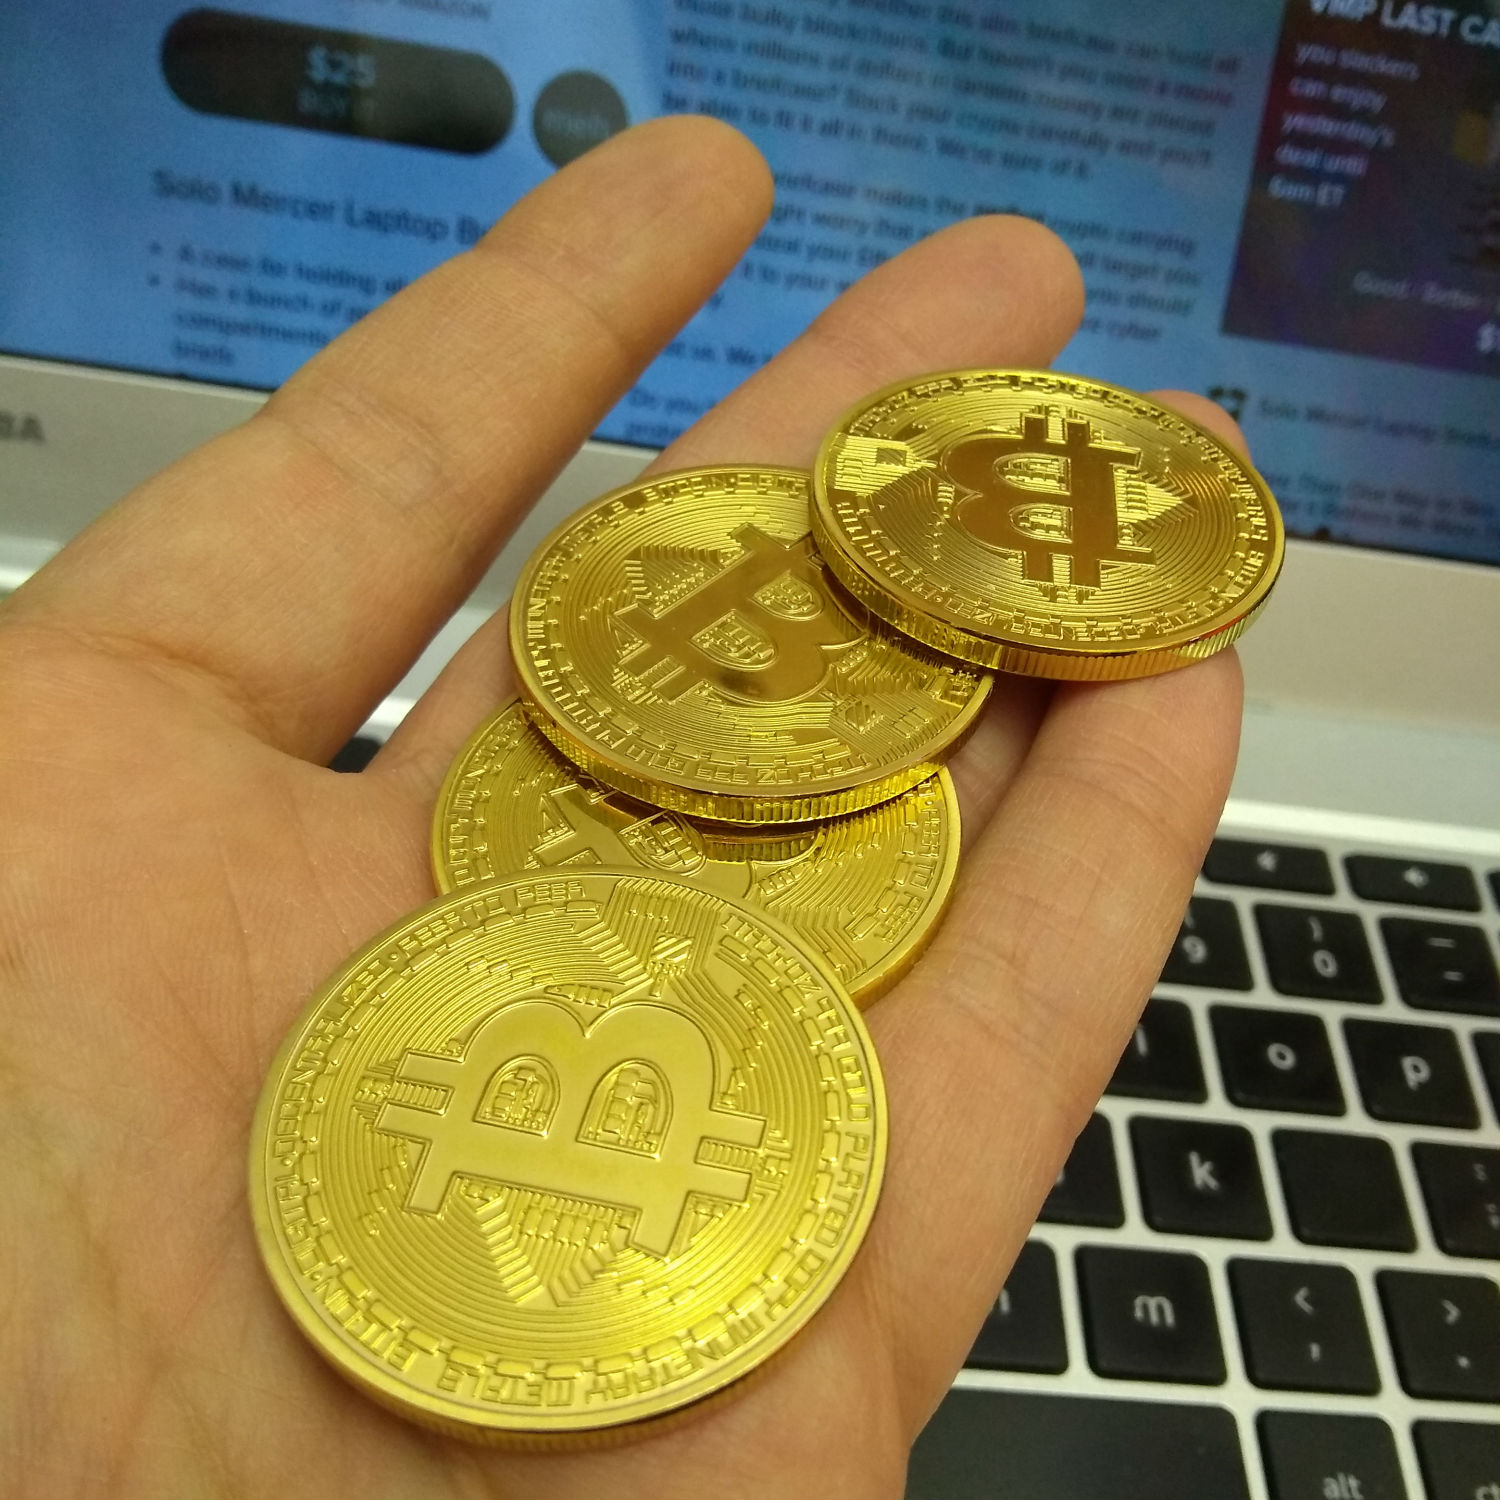 can i legally sell my own cryptocurrency